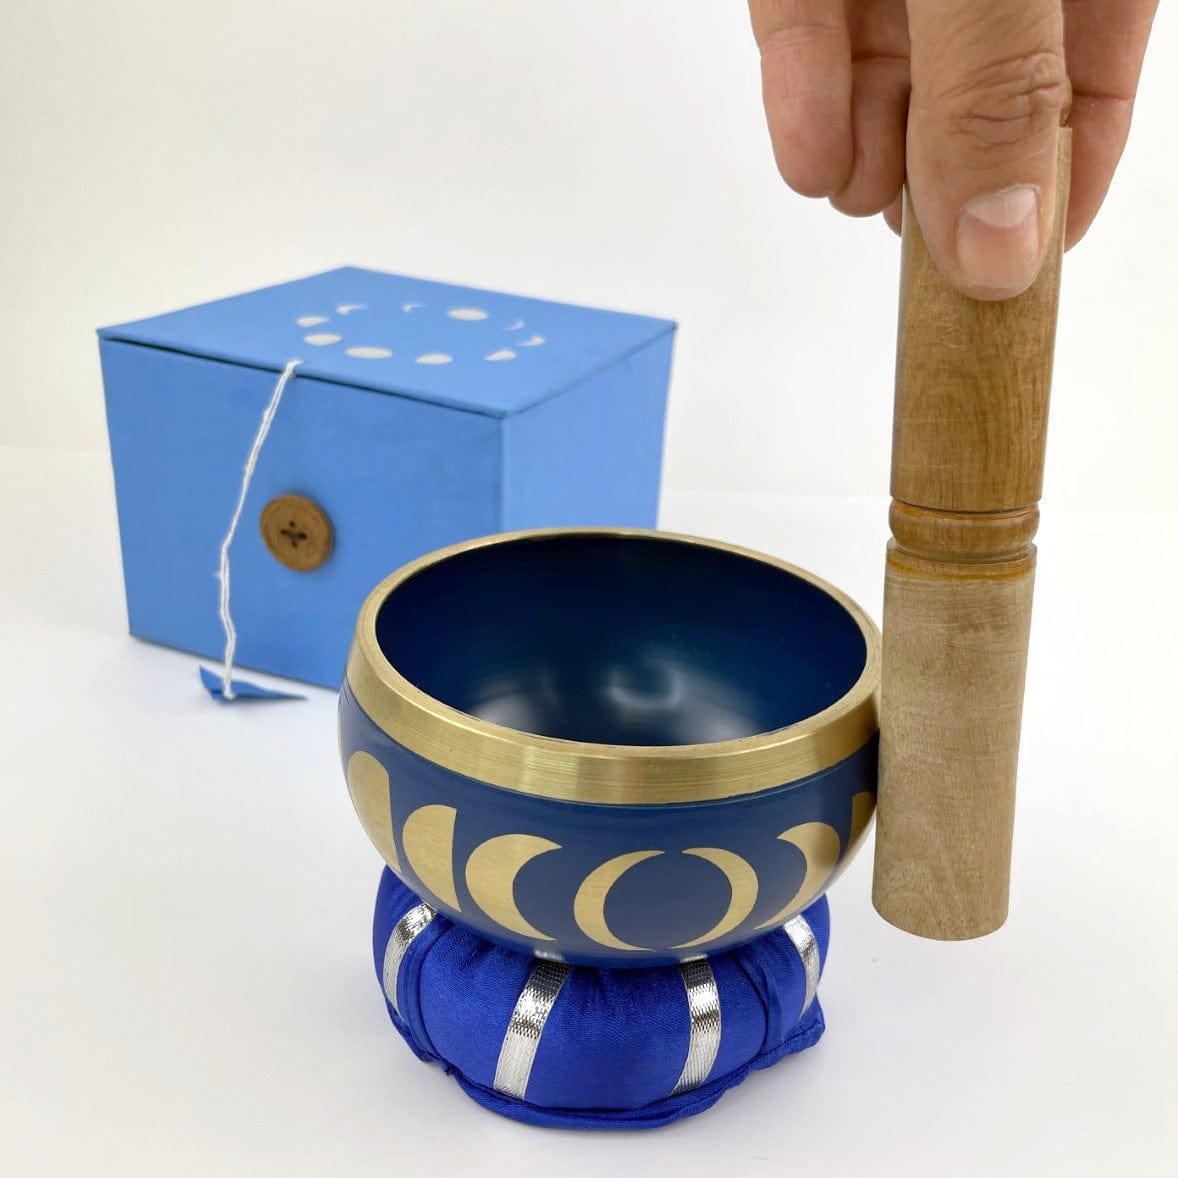 blue singing bowl with mallot on edge showing in use. with blue box behind